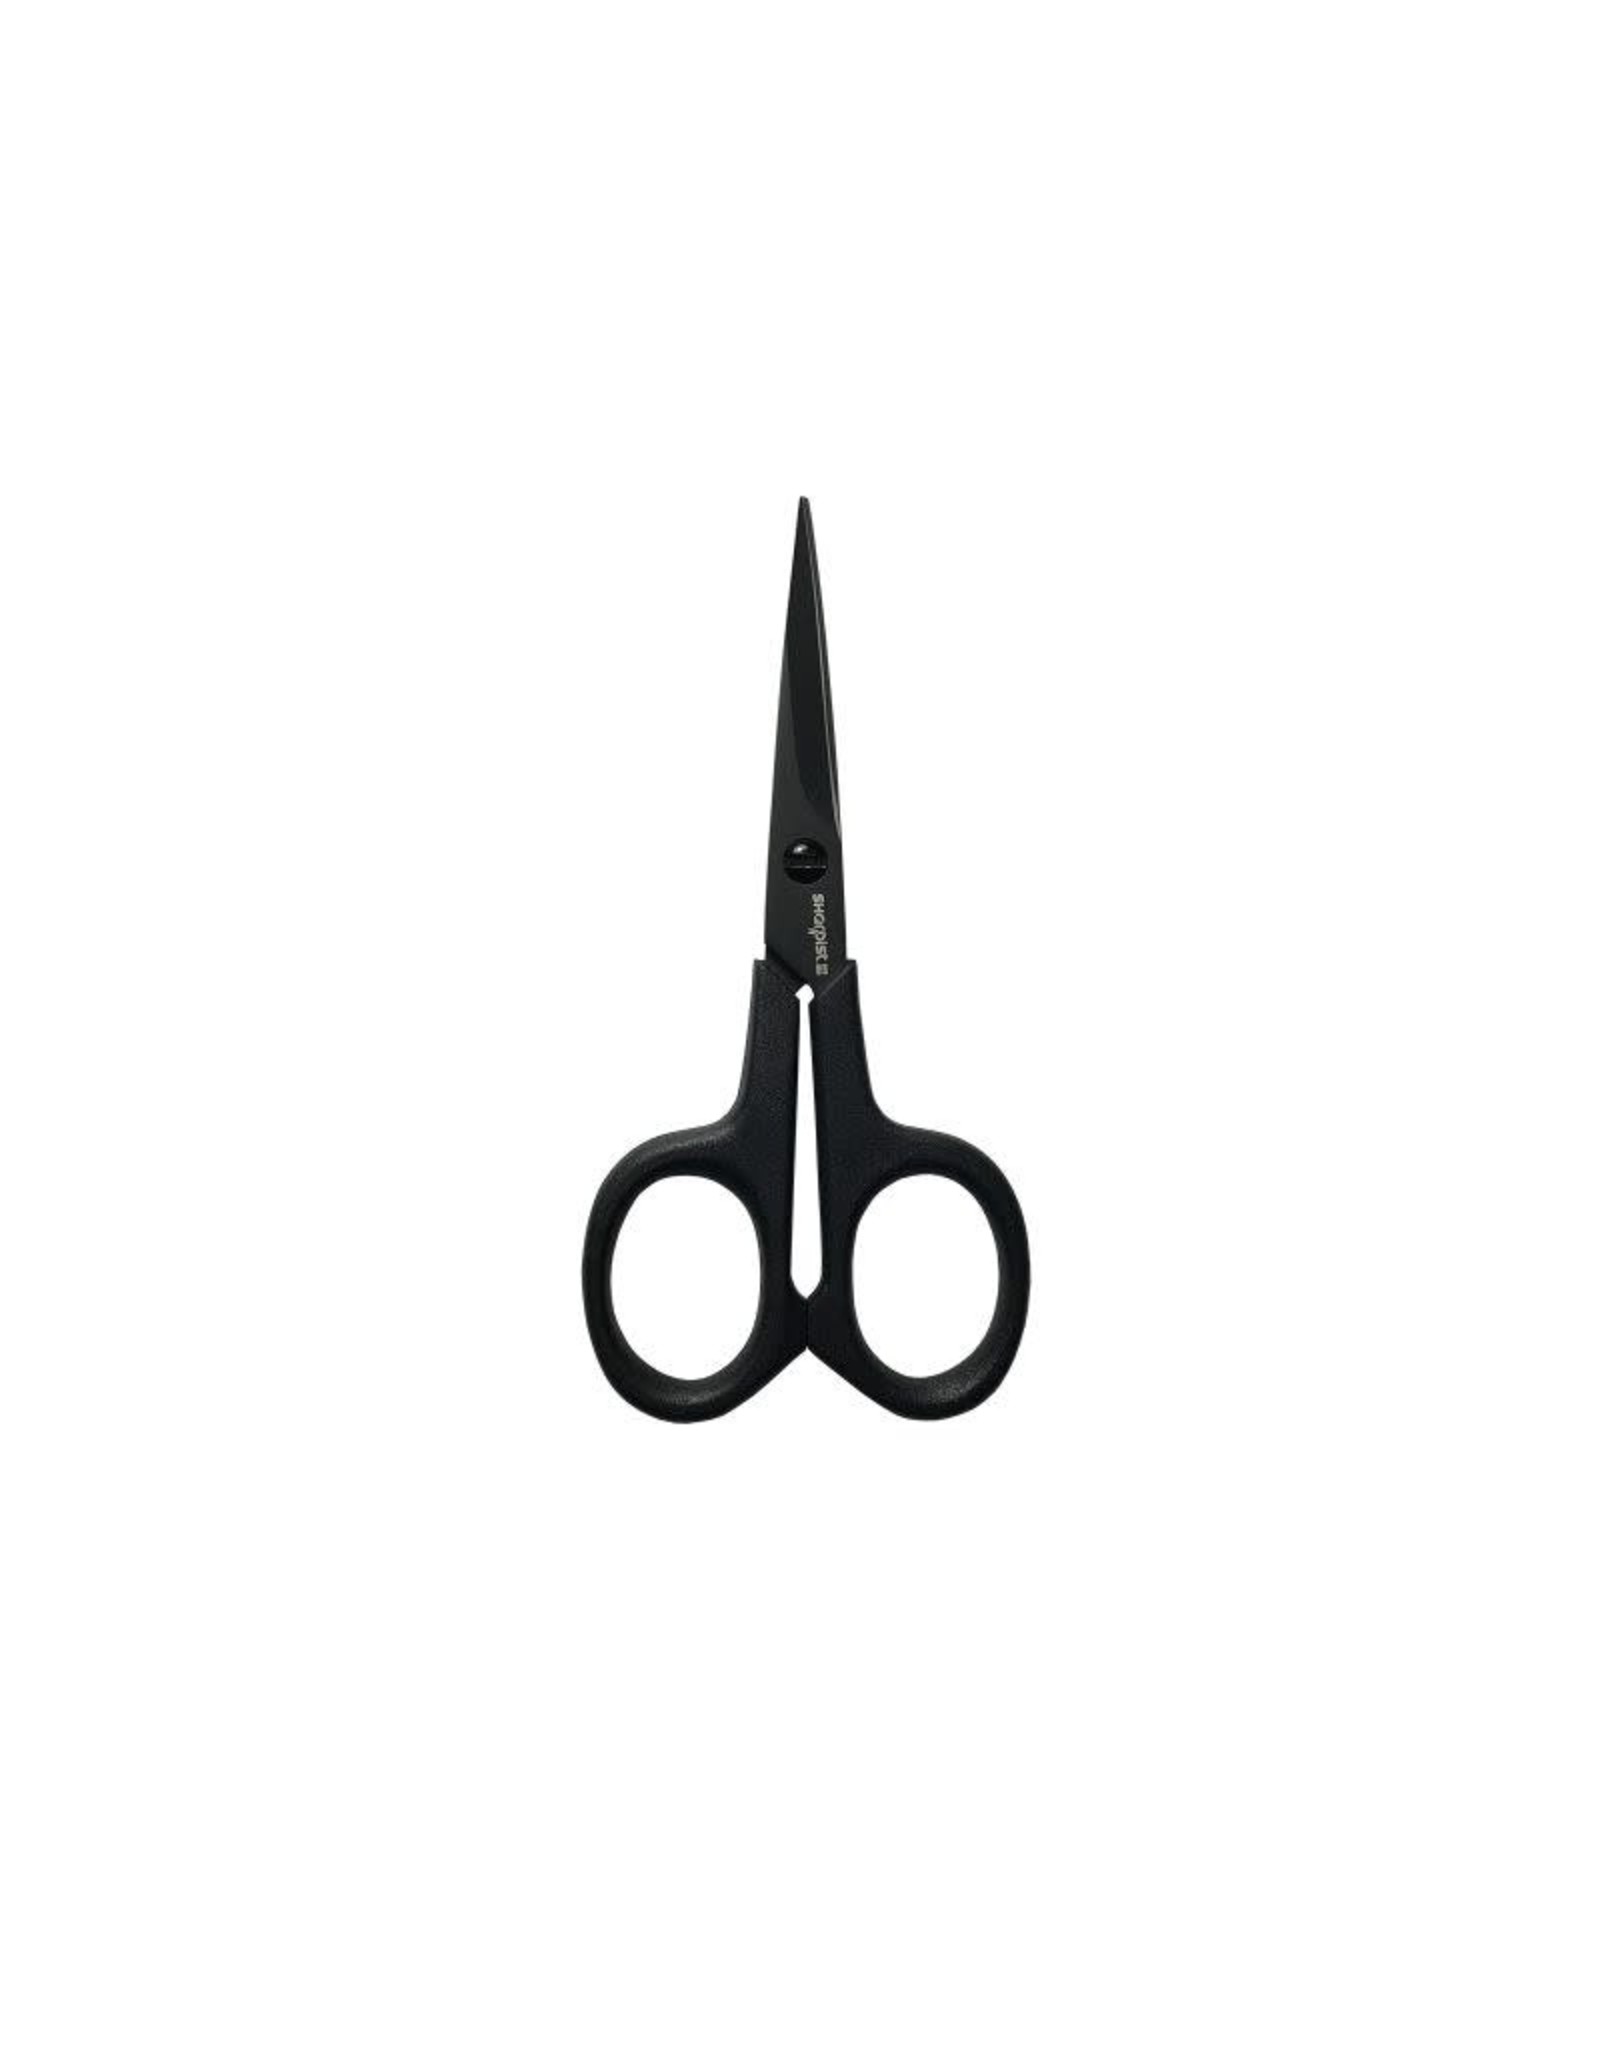 Restyle Sharpist Pro / Restyle - embroidery scissors 10,4 cm / 4,5 inch